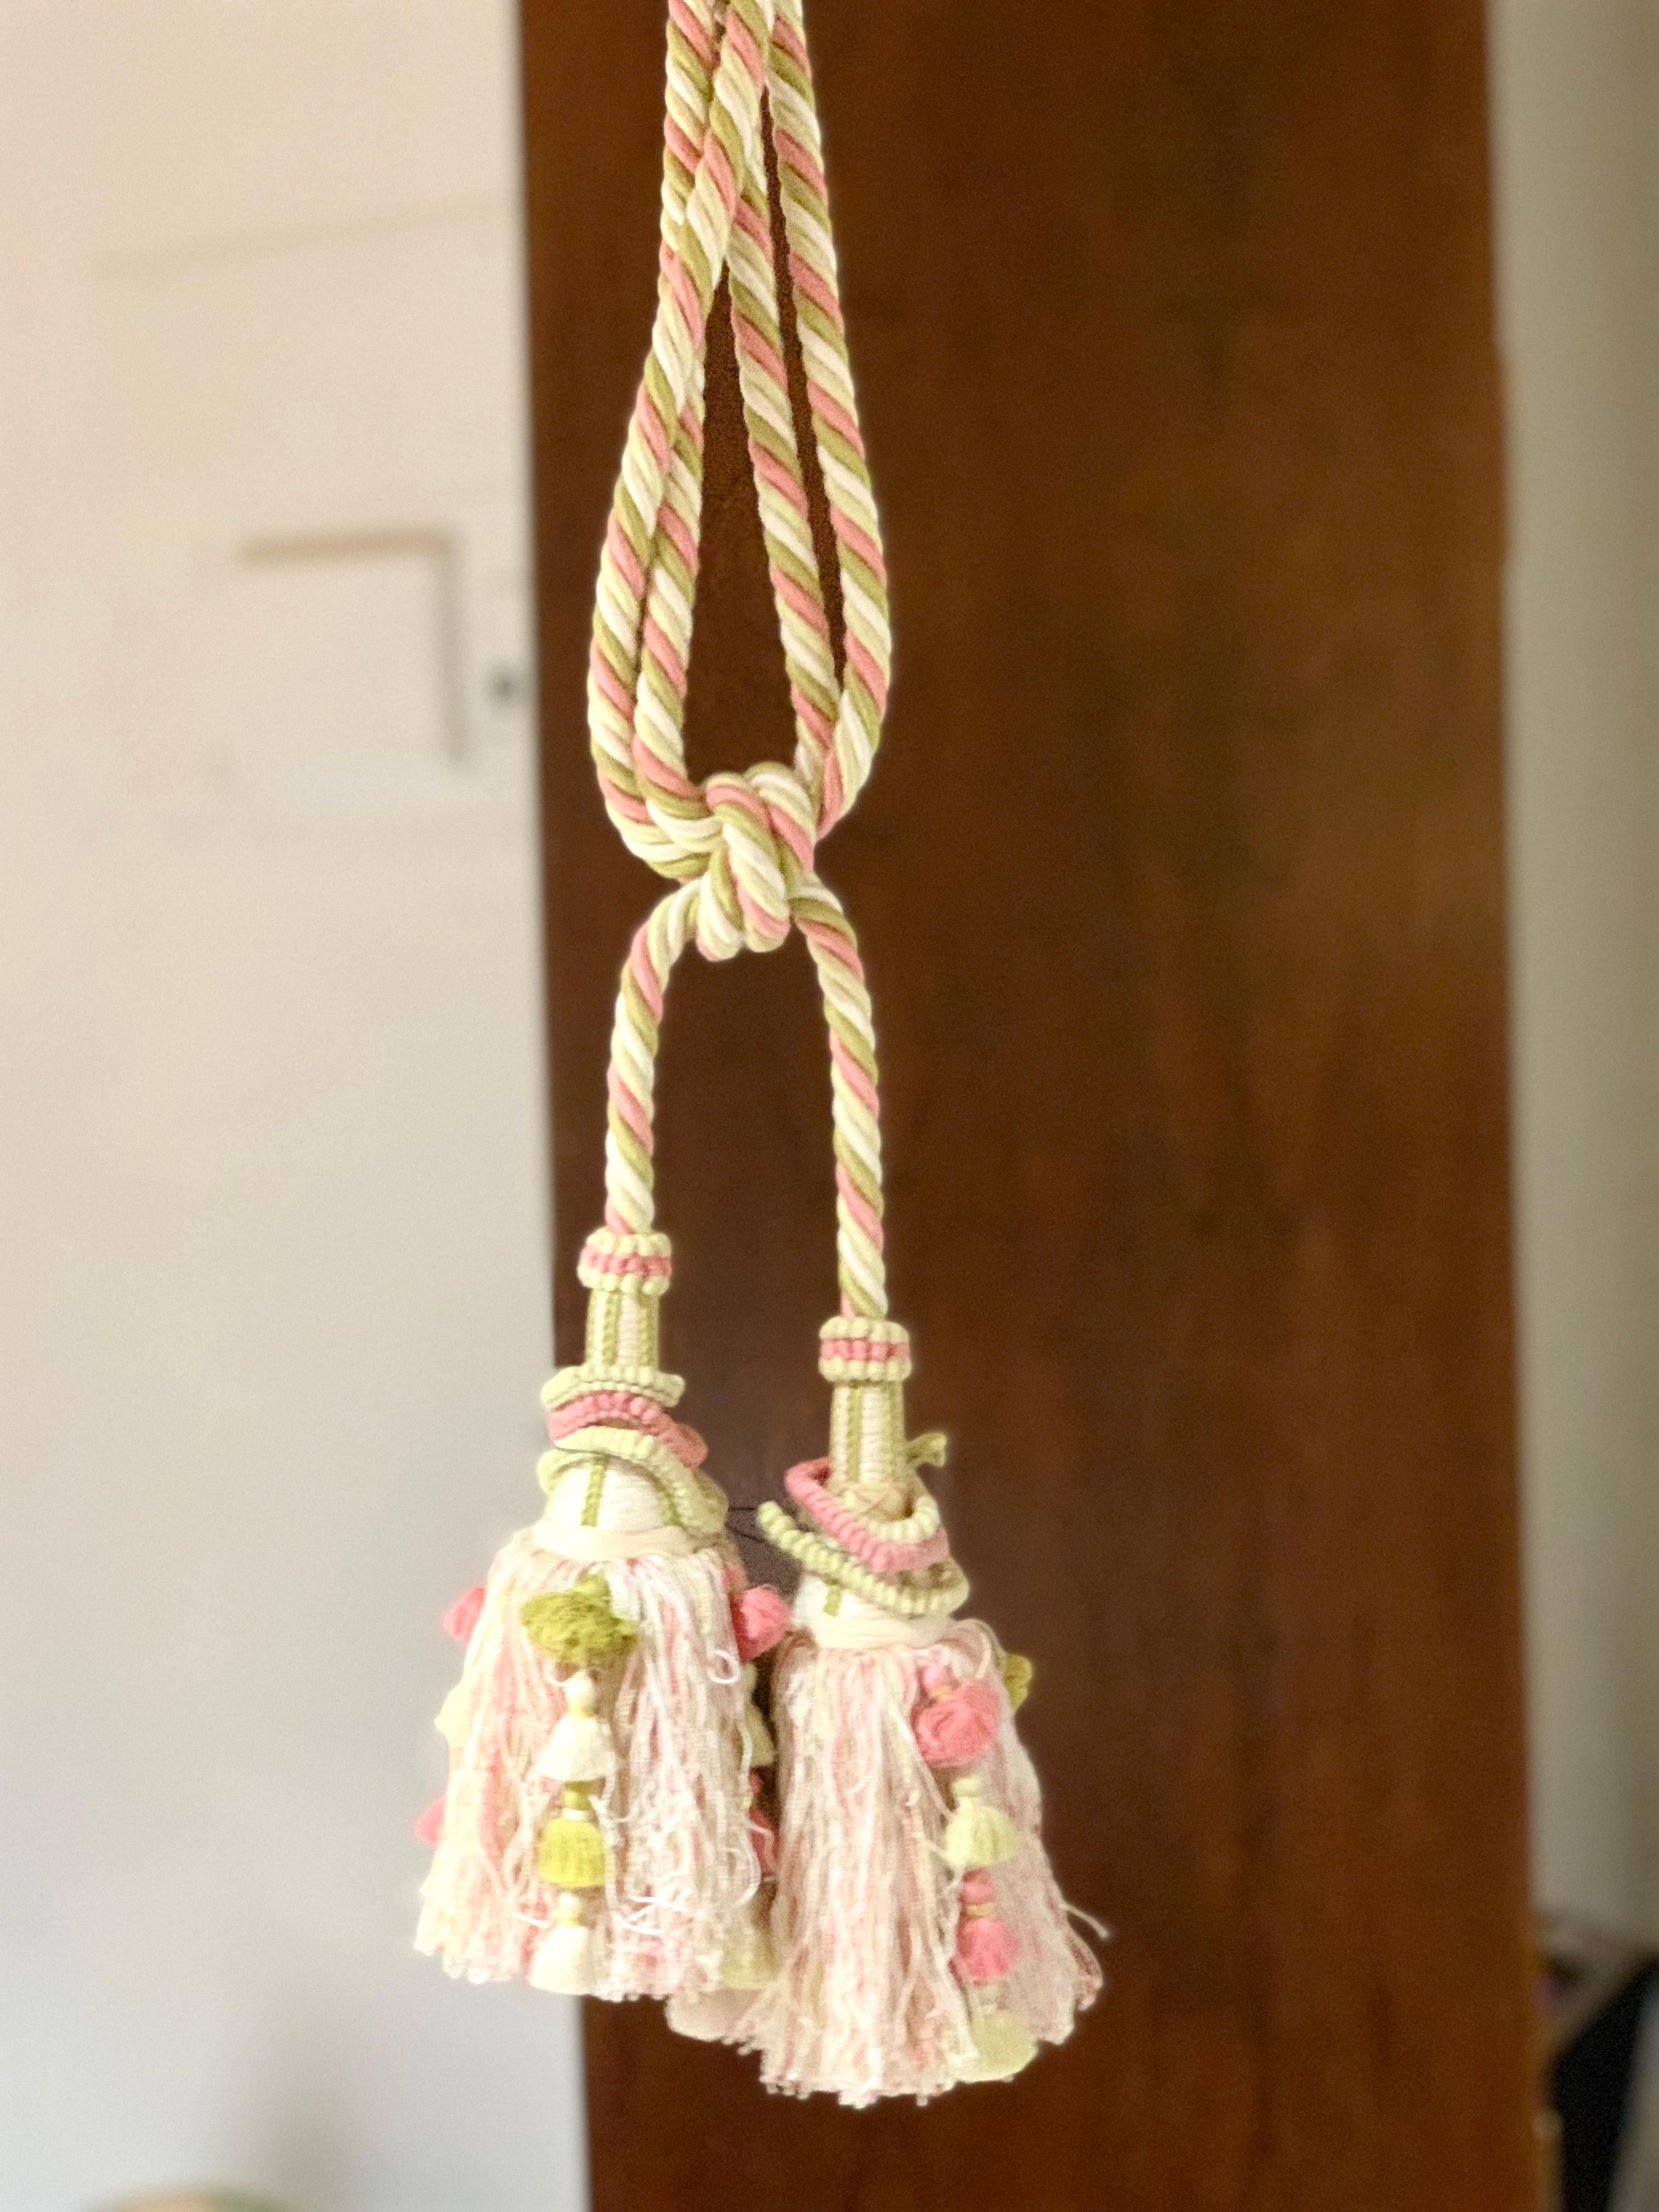 Vintage Scalamandre pink, cream, green tassel tie-backs, home accessory, curtain. Three tassel pairs available. Listing is for single pair as shown in images 1 and 2.